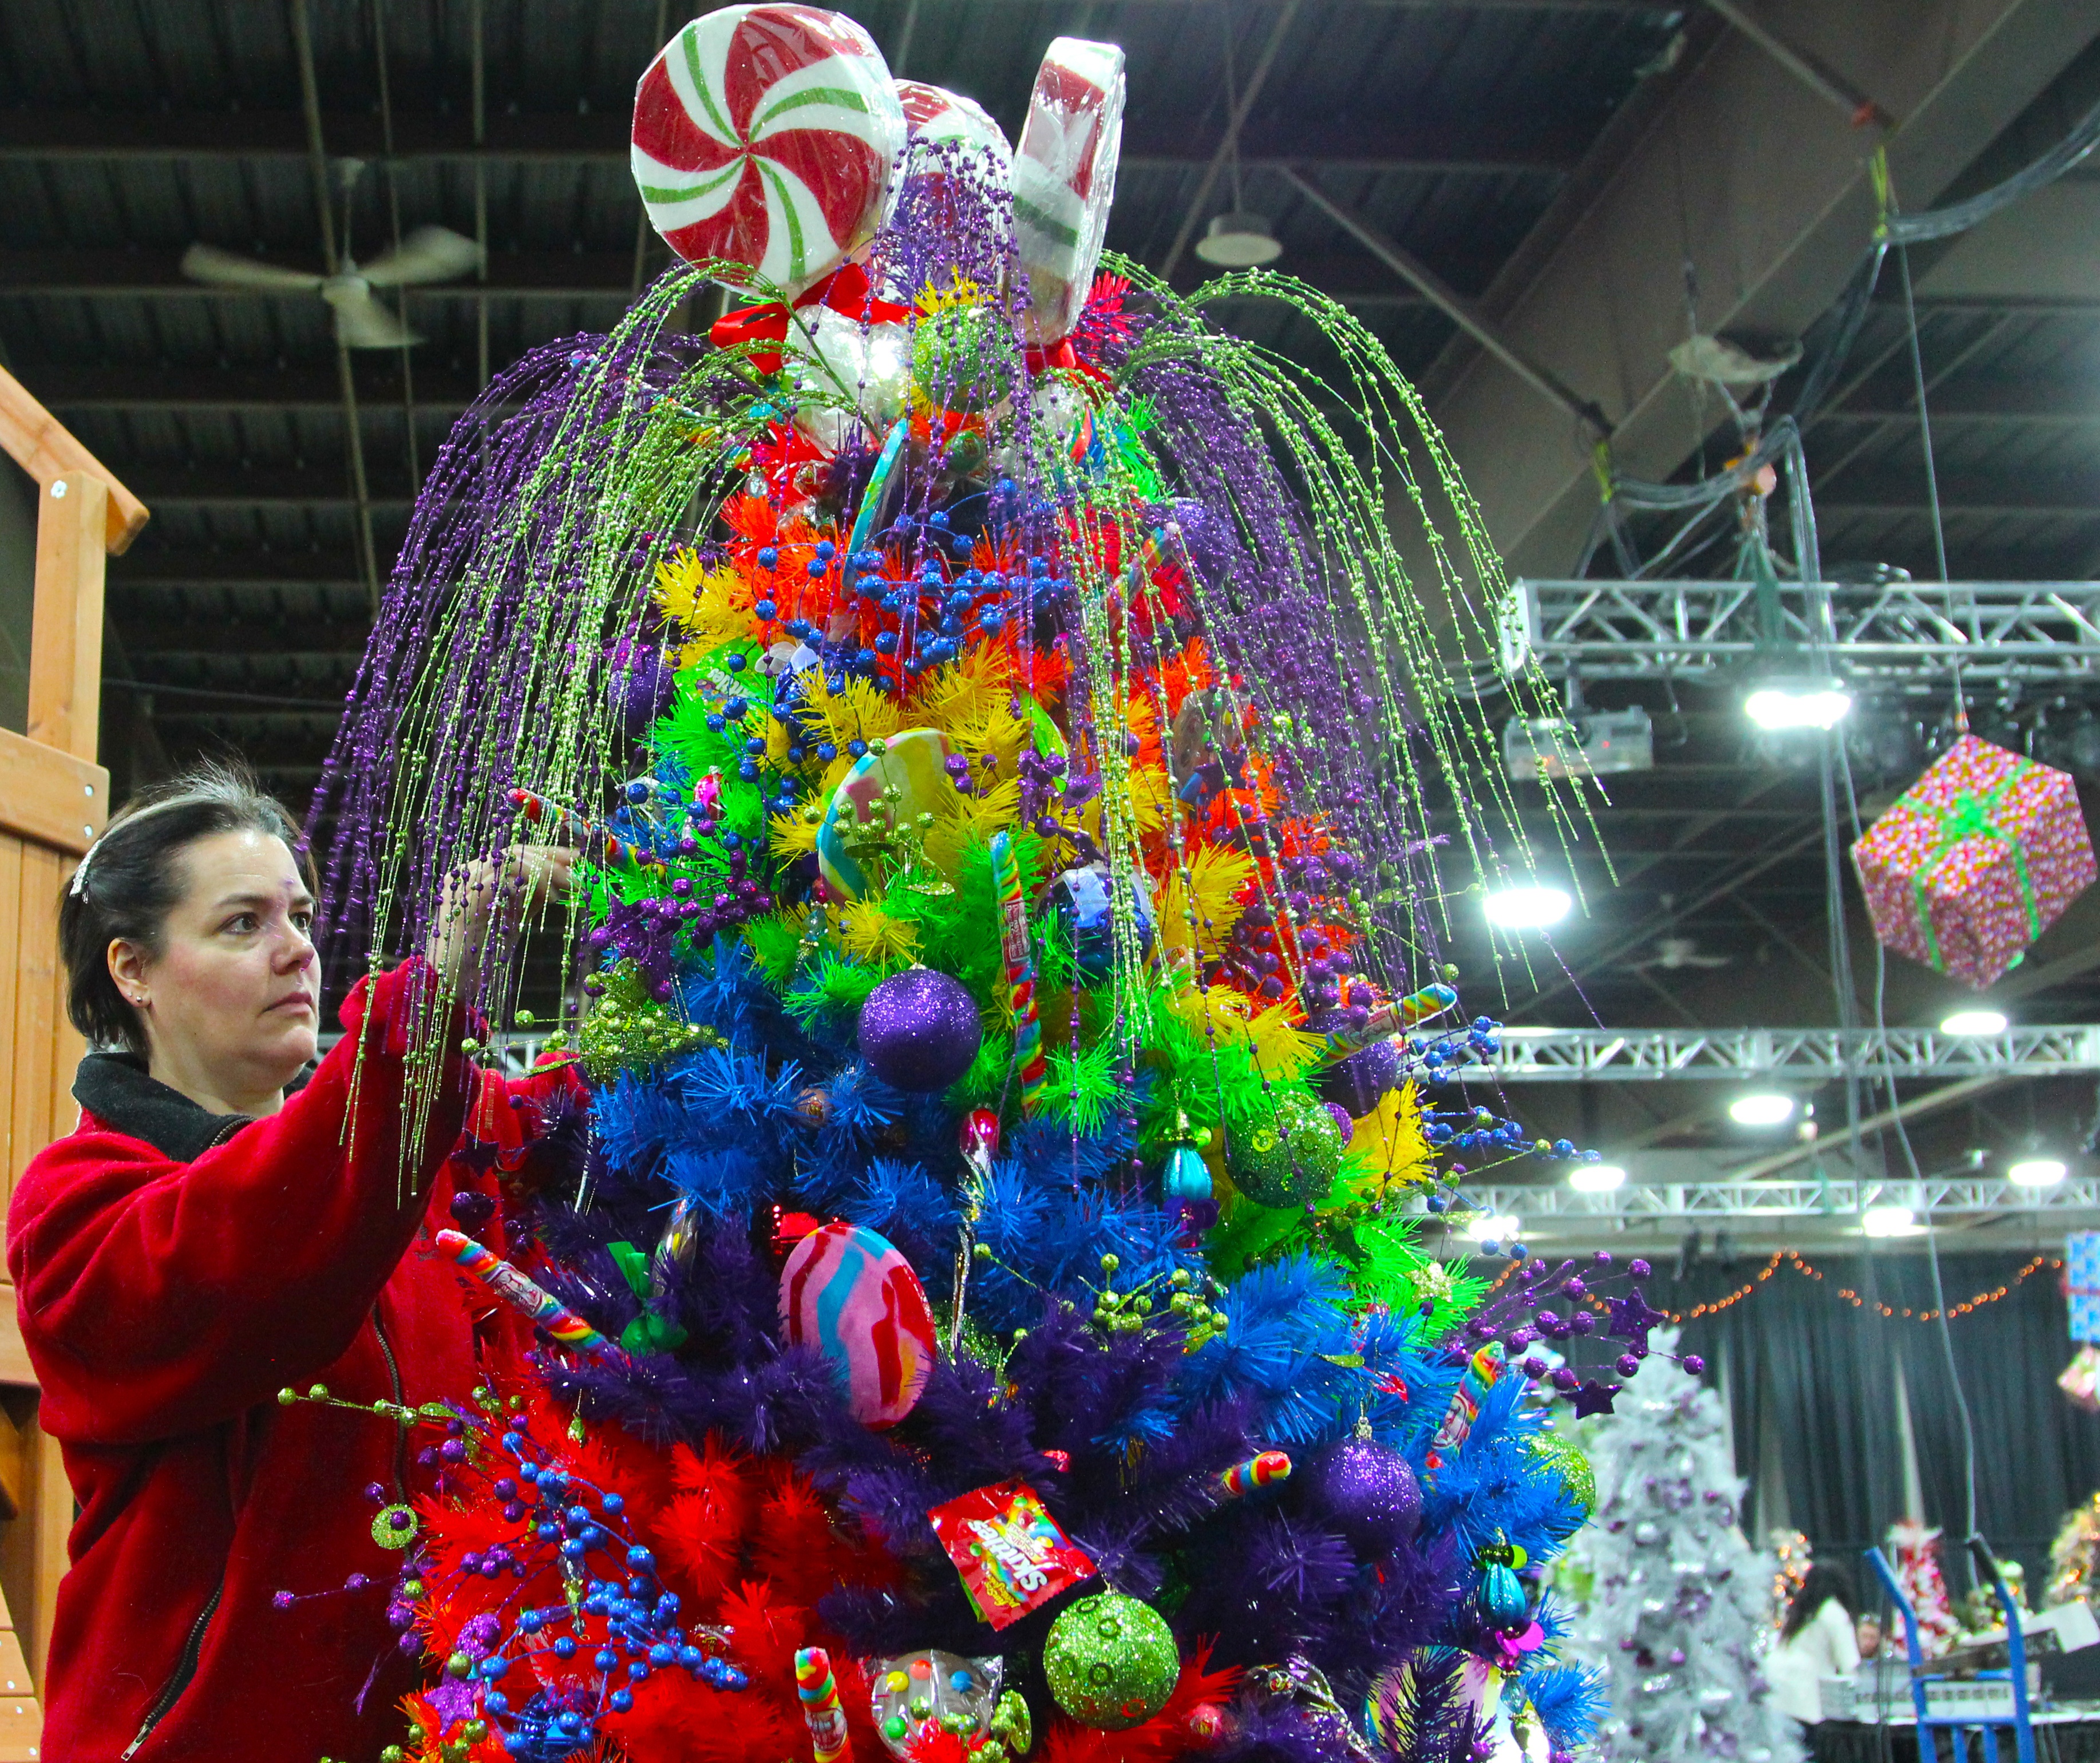 LOLLIPOPS & RAINBOWS – Martine Giguere puts the finishing touches on a bright candy-themed Christmas tree that will be on display at this year’s Festival of Trees.